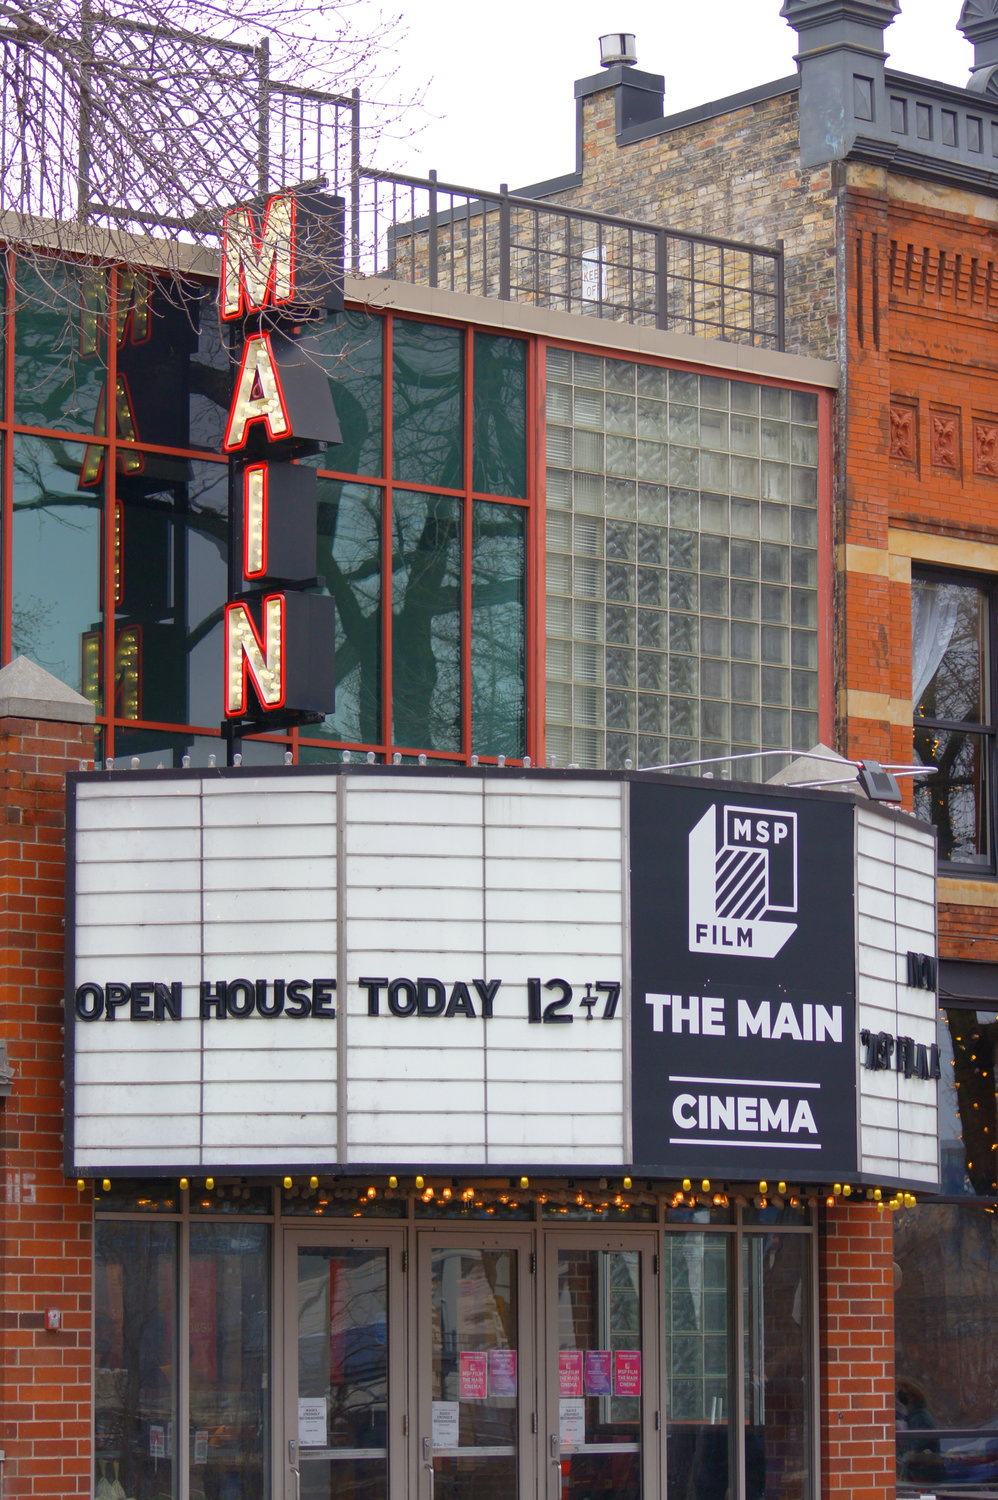 The concessions counter at the theater on 115 SE Main was remodeled. New carpeting was installed on the stair to the second floor, and the second-floor concession stand was removed. The old bulb-illuminated exterior “Main” sign remained, but the marquee below has been remodeled to include the MPS Film Society name. (Photo by Terry Faust)